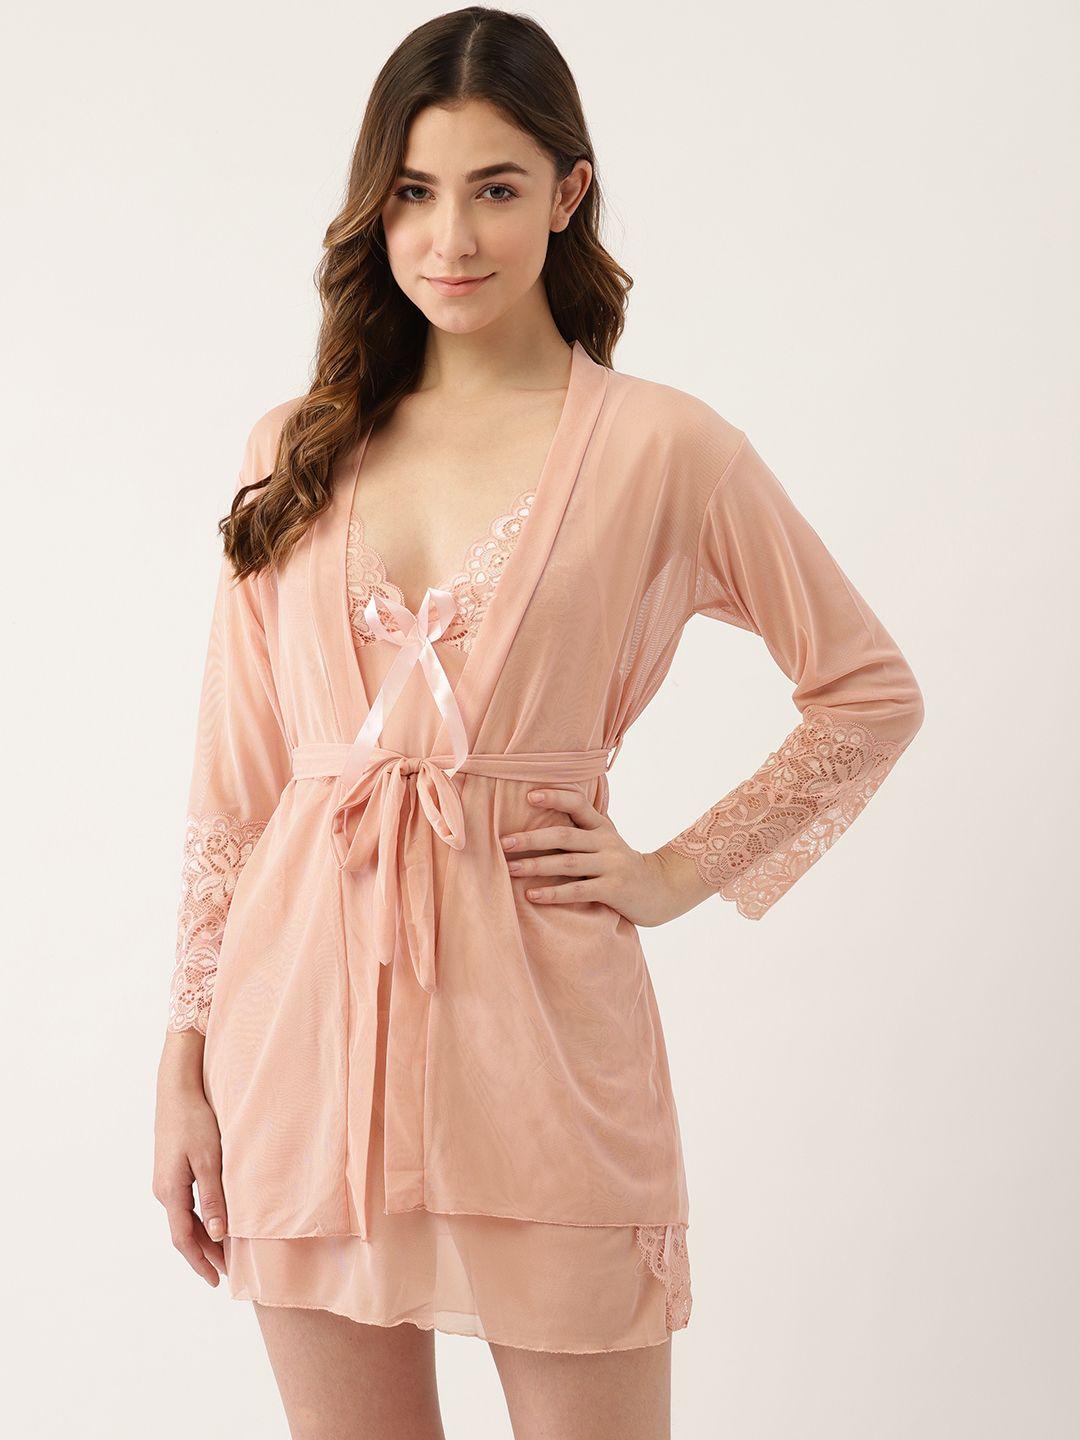 ms-lingies-women-peach-coloured-self-design-baby-doll-comes-with-a-robe